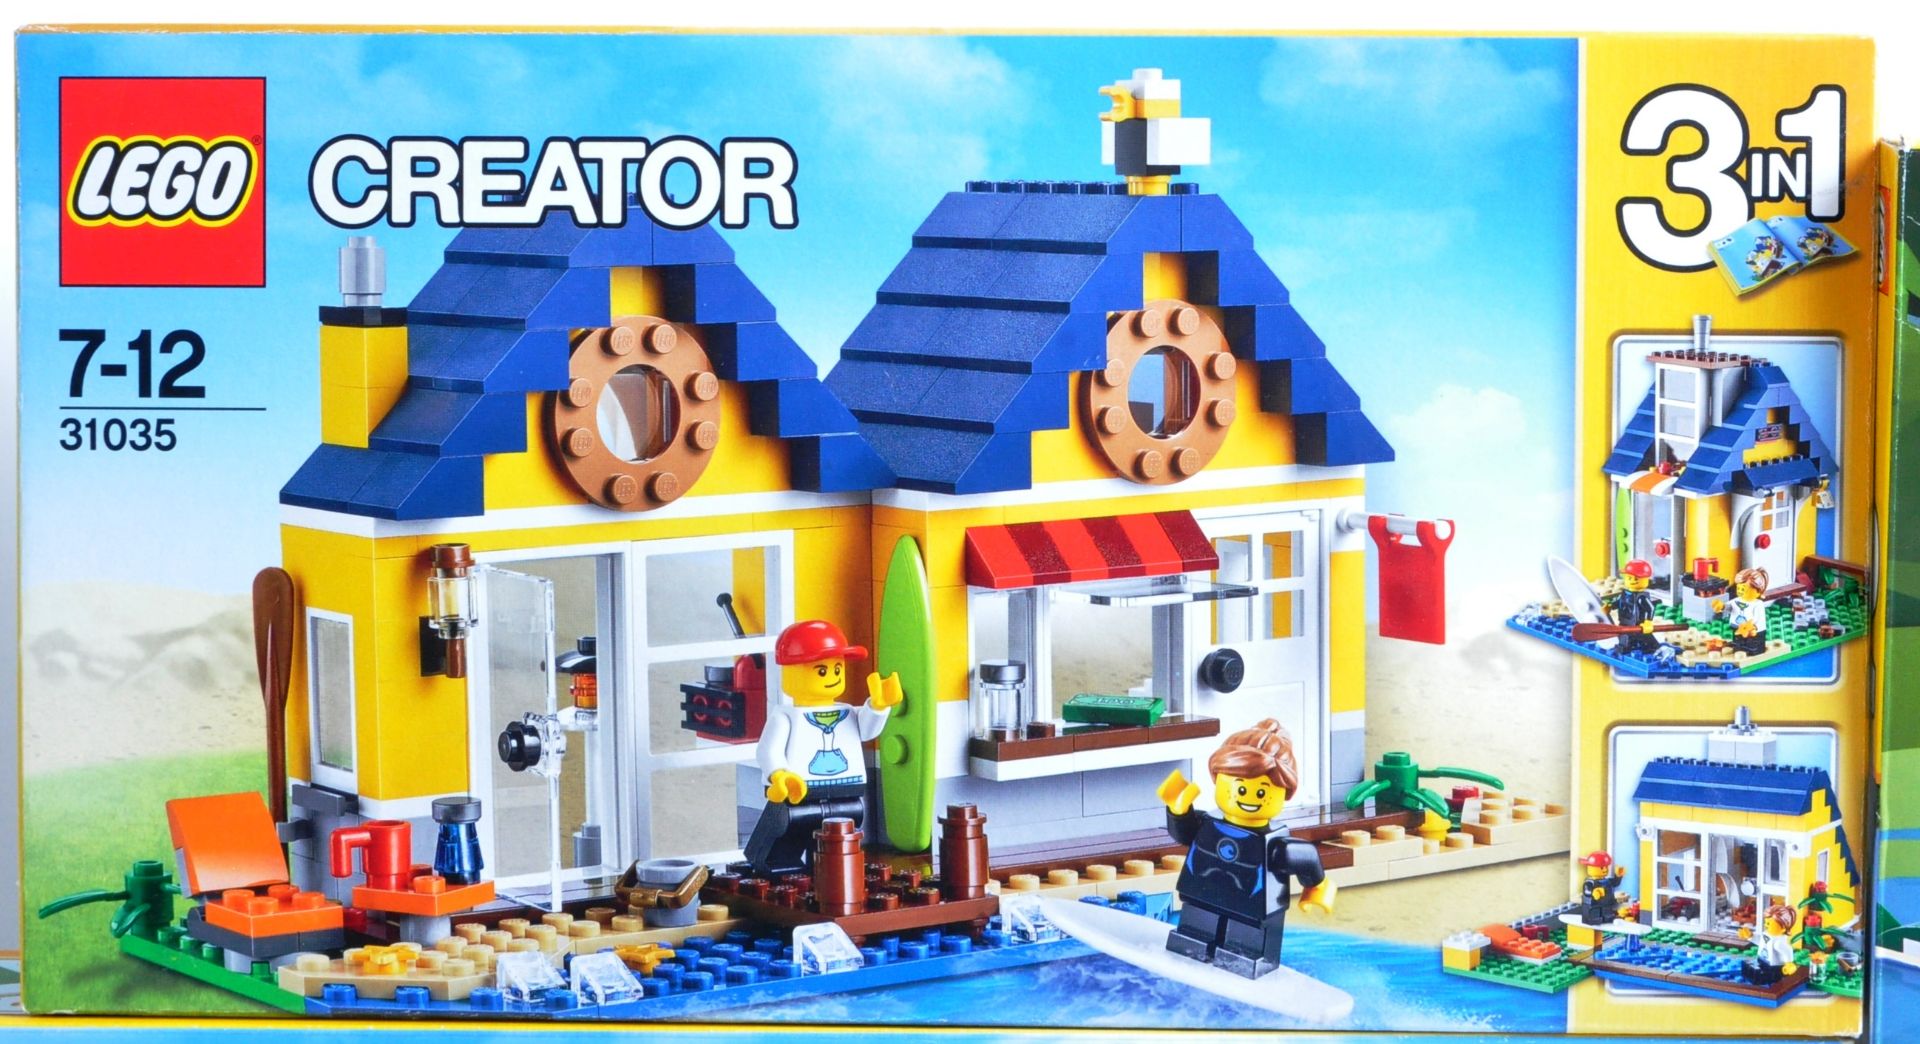 LEGO SETS - LEGO CREATOR 3 IN 1 - 5766 / 31035 / 31093 / 31038 - Image 3 of 7